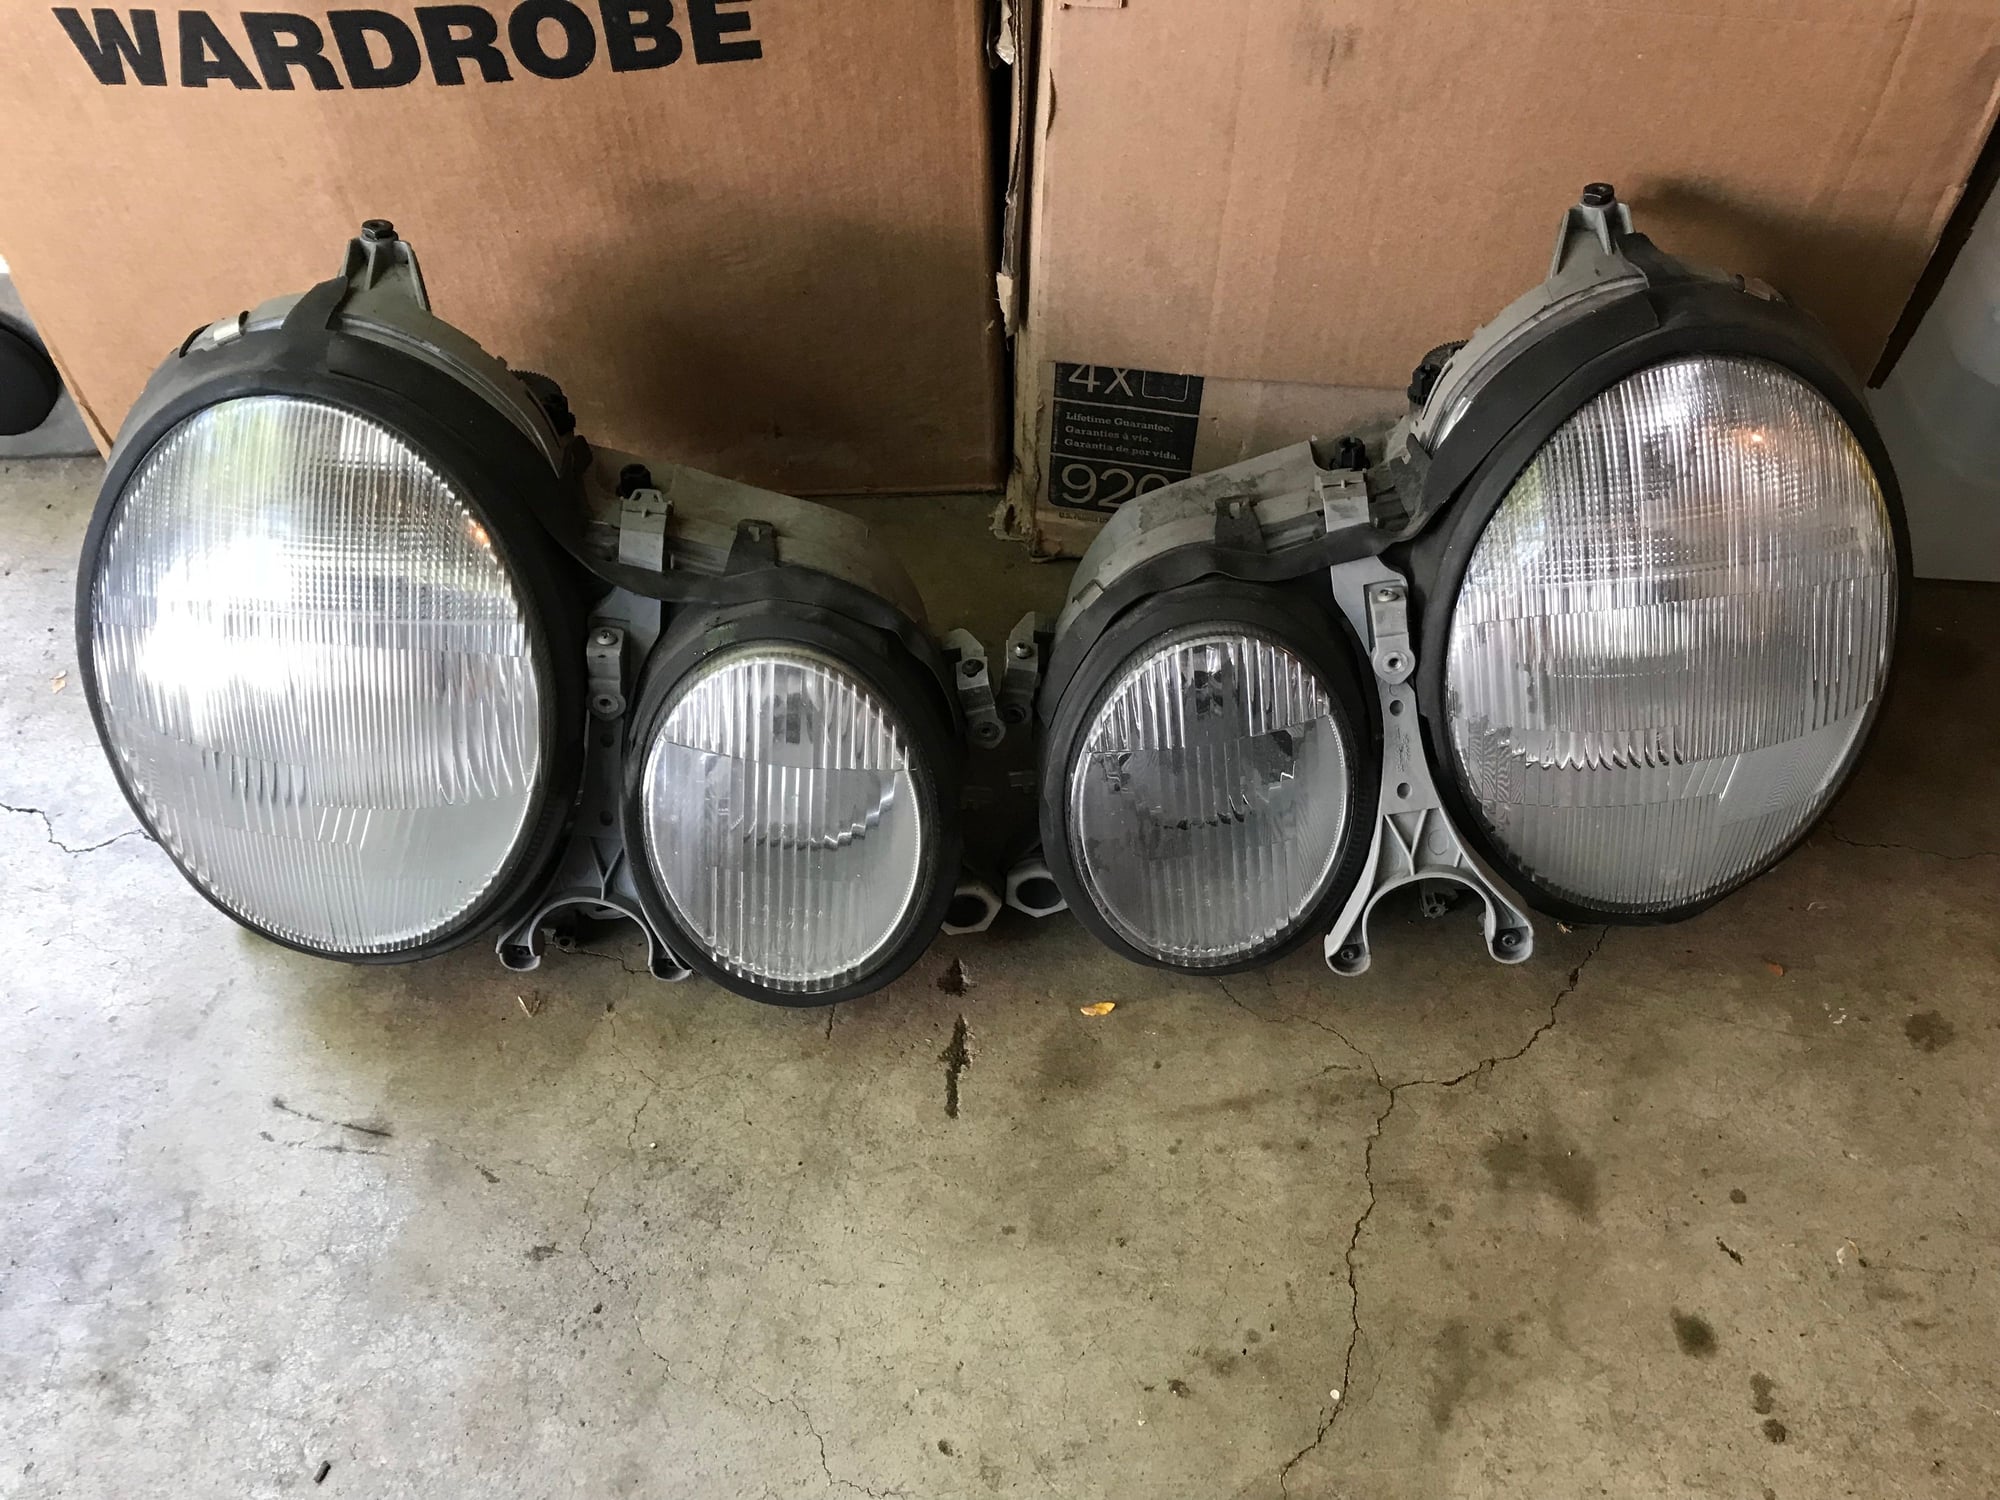 Lights - Facelift W210 S210 E320 E430 Halogen Hella HEADLIGHTS - Used - 2000 to 2002 Mercedes-Benz E320 - Lake In The Hills, IL 60156, United States